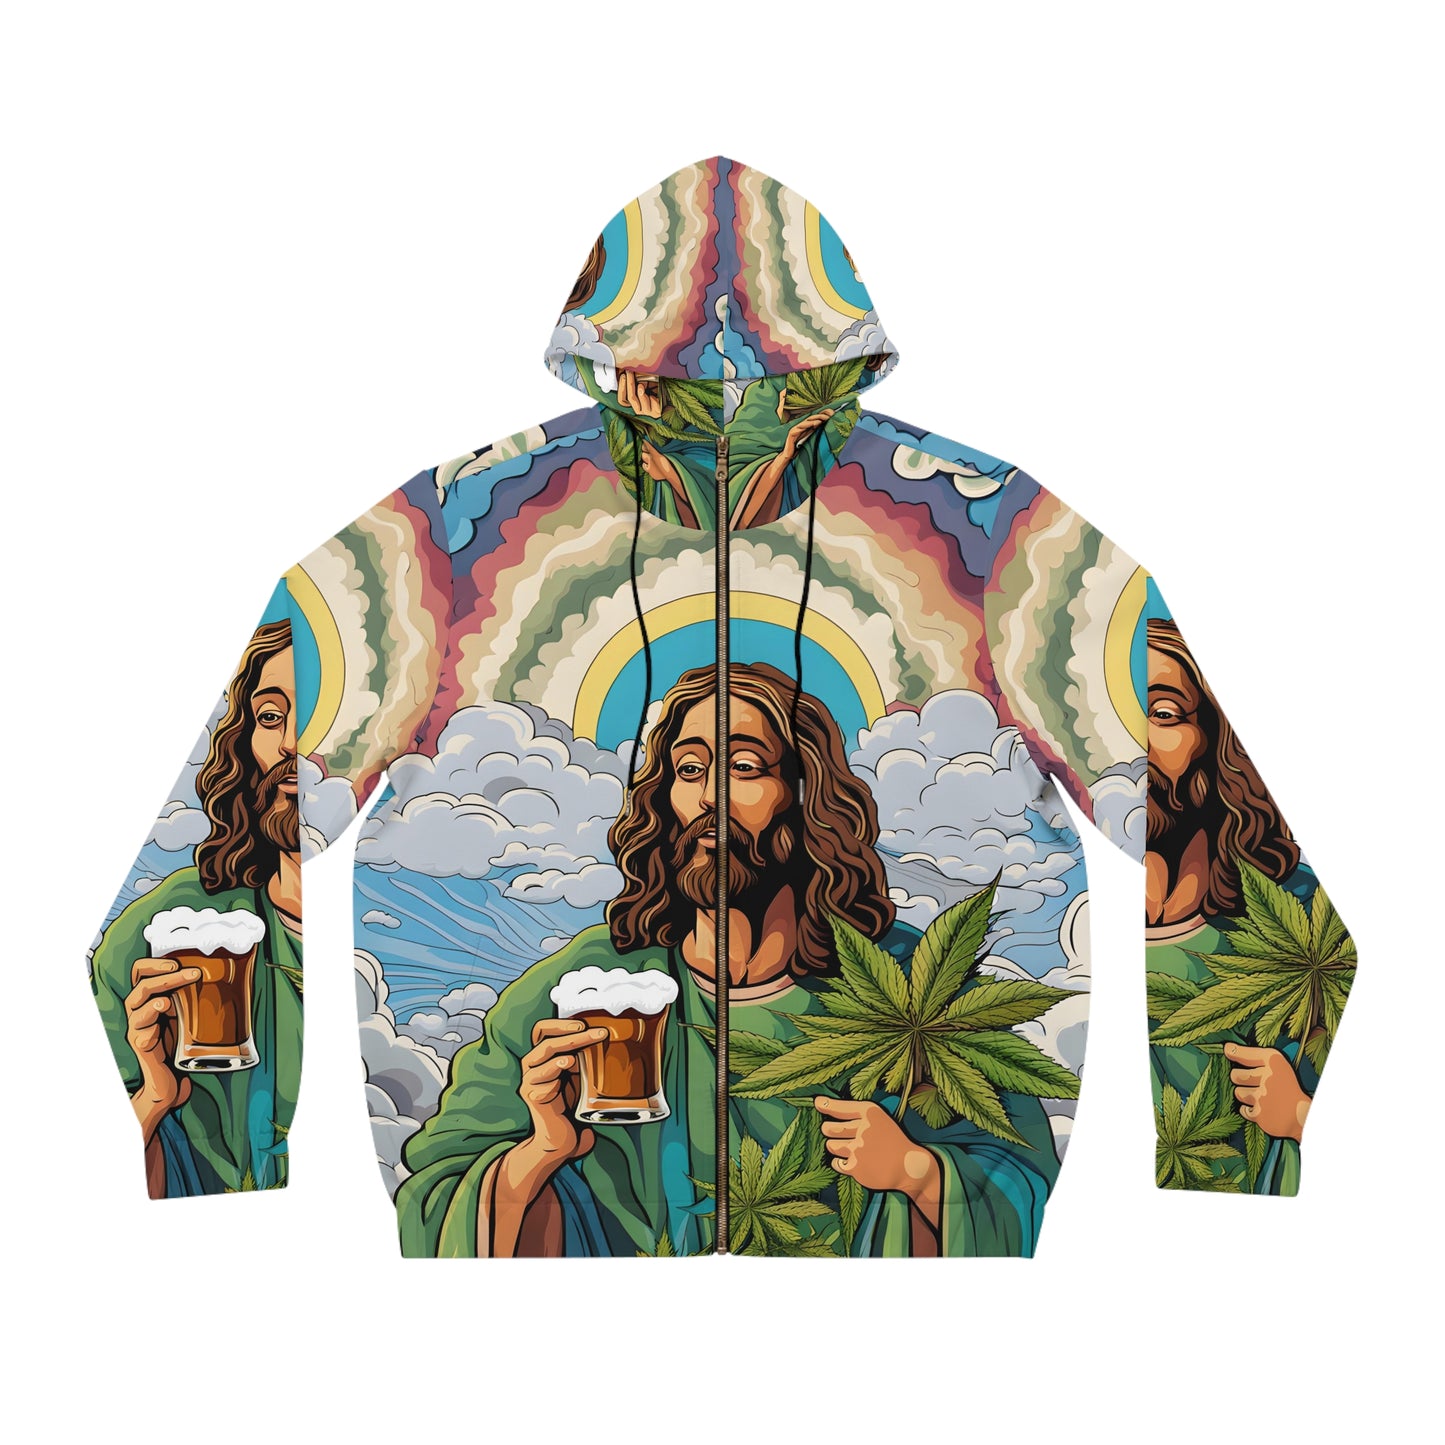 Vectorized Dreamscapes: Jesus, 420, Weed, Beer, Cloudy Sky